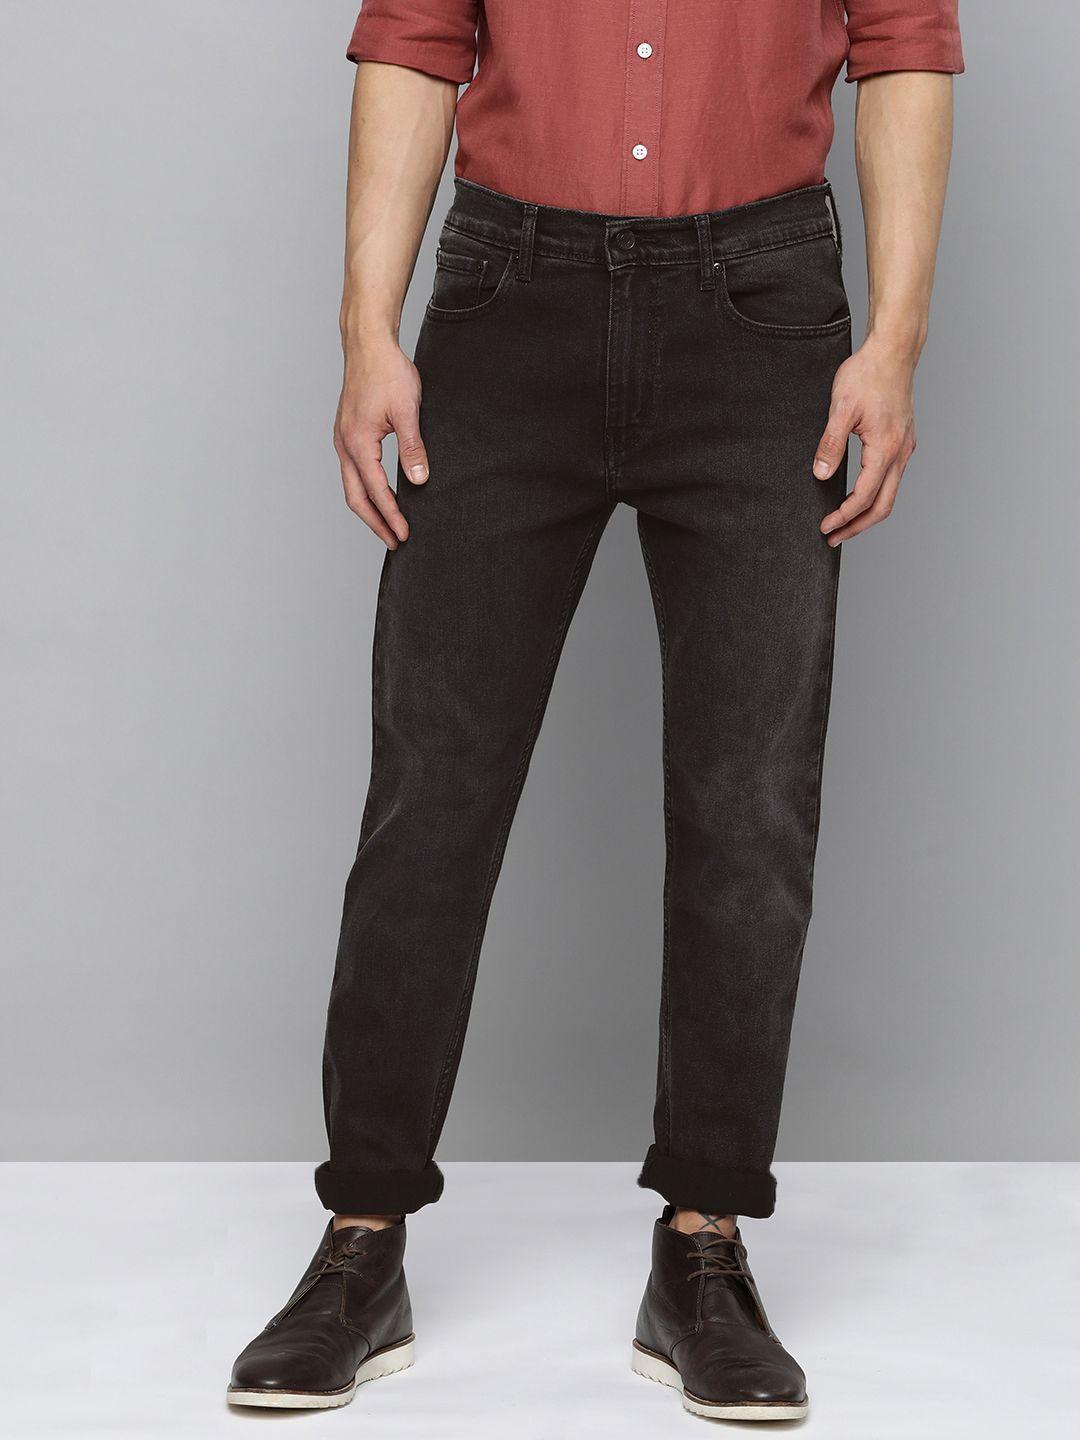 levis-men-512-tapered-fit-low-rise-light-fade-stretchable-jeans